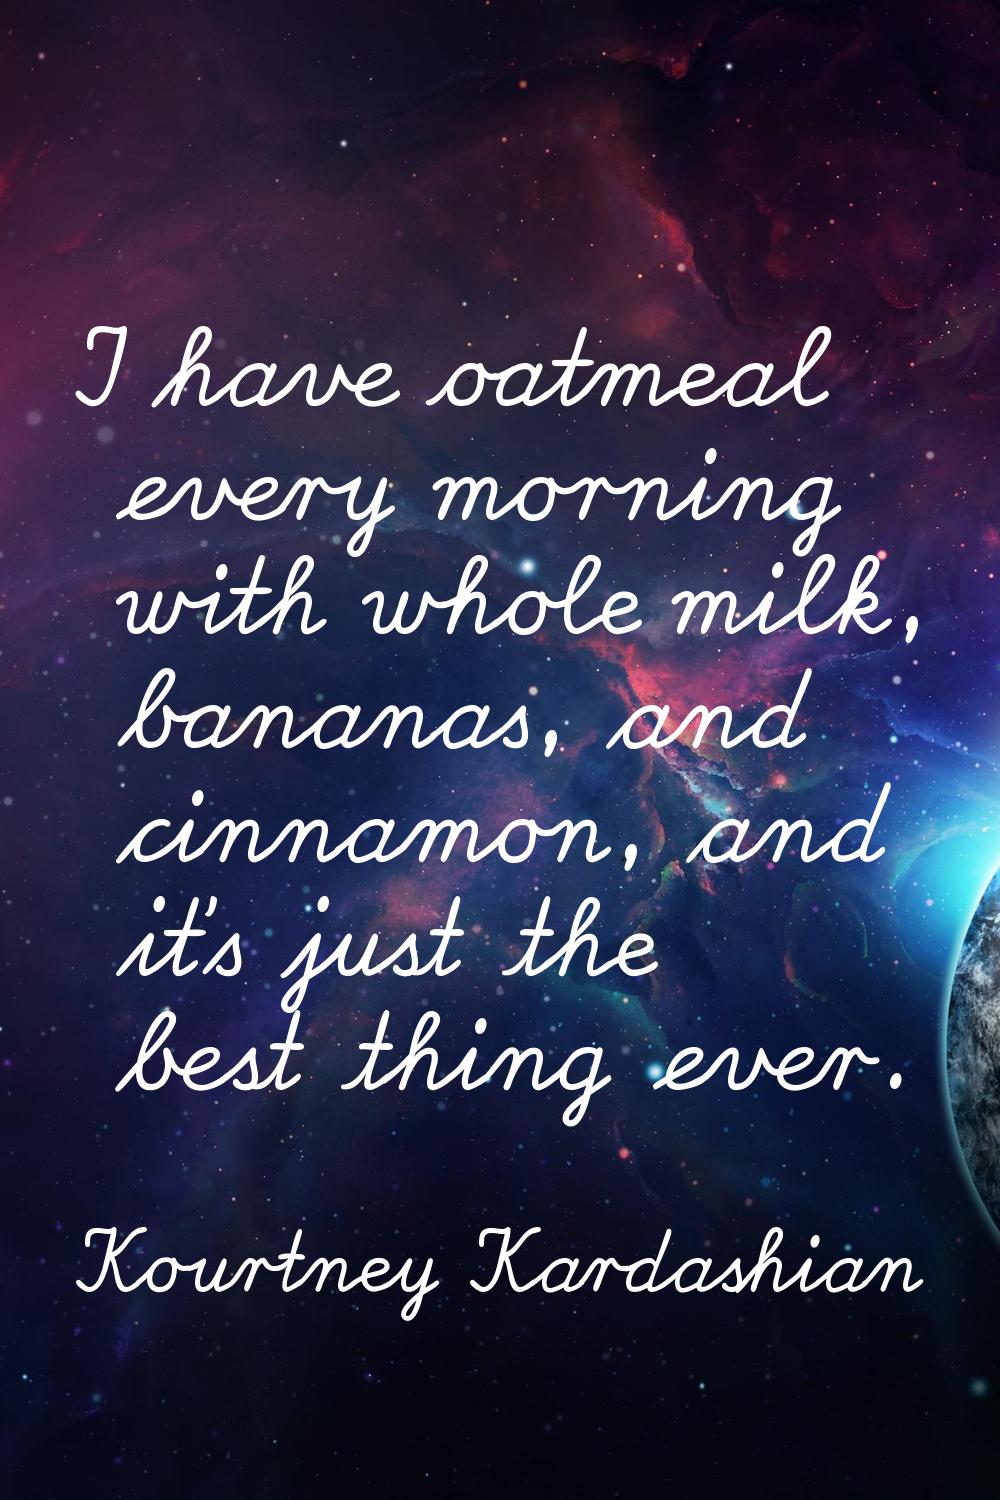 I have oatmeal every morning with whole milk, bananas, and cinnamon, and it's just the best thing e